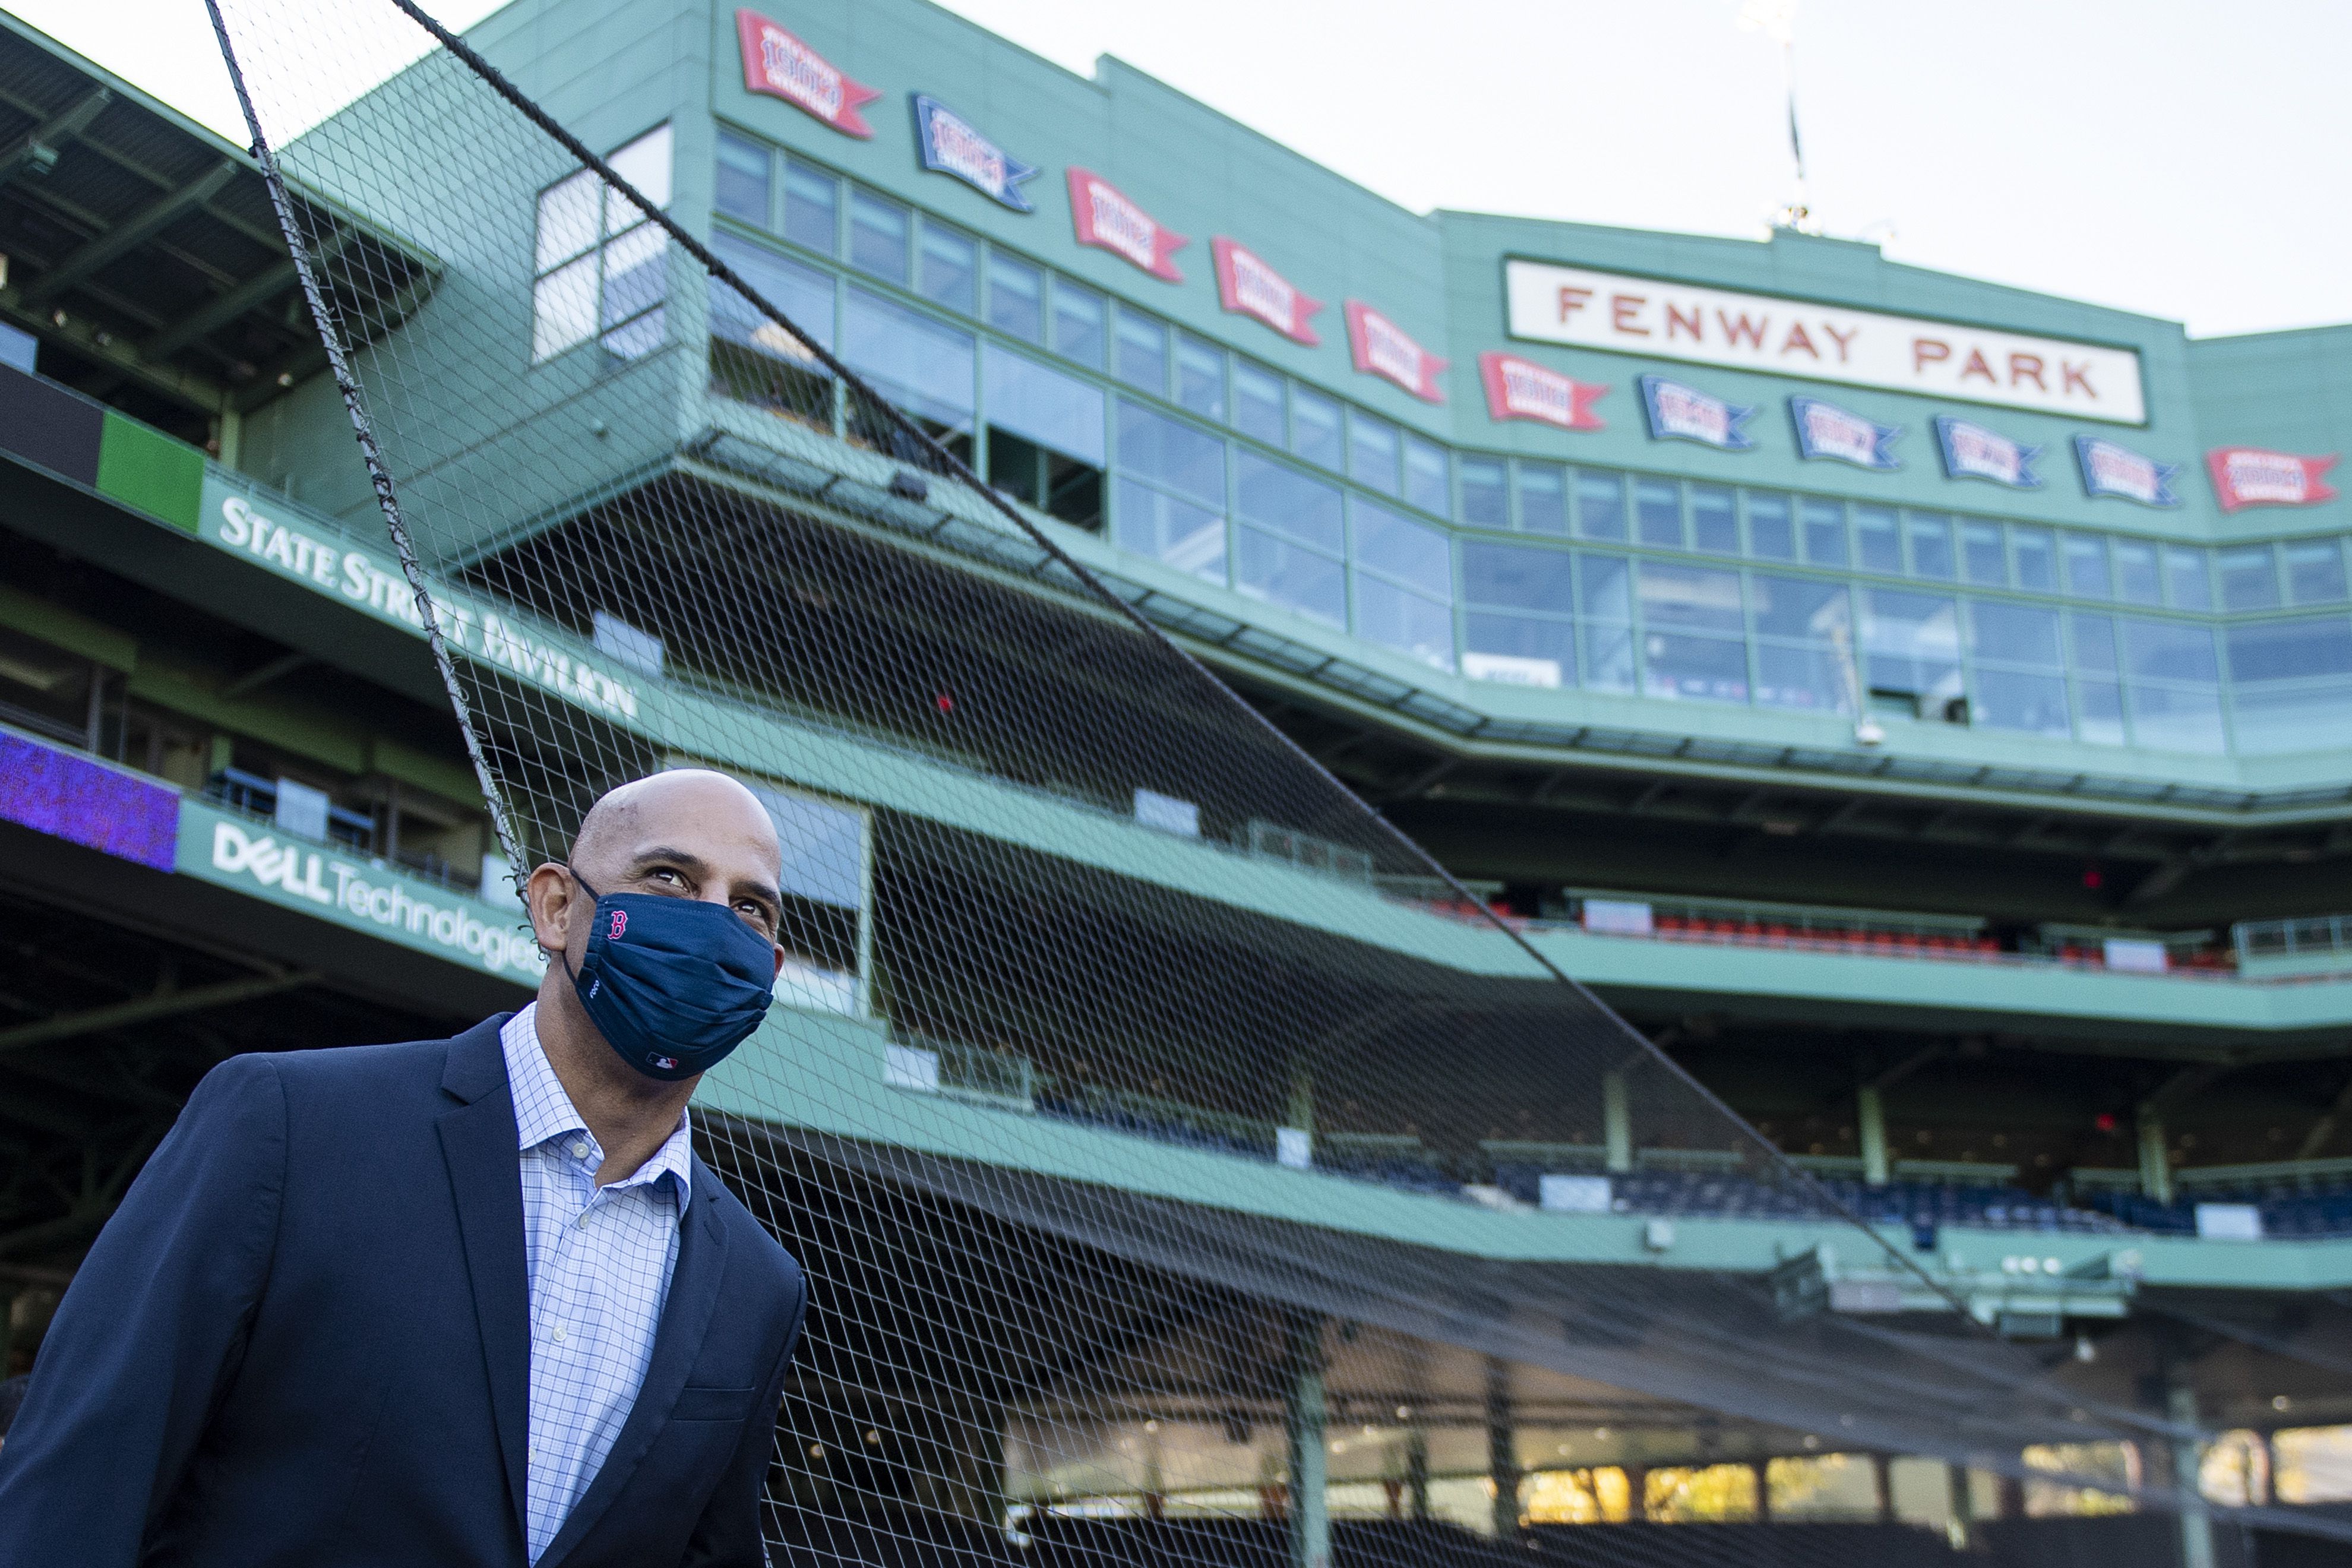 Red Sox keeping 7:10 p.m. as standard start time for Fenway Park